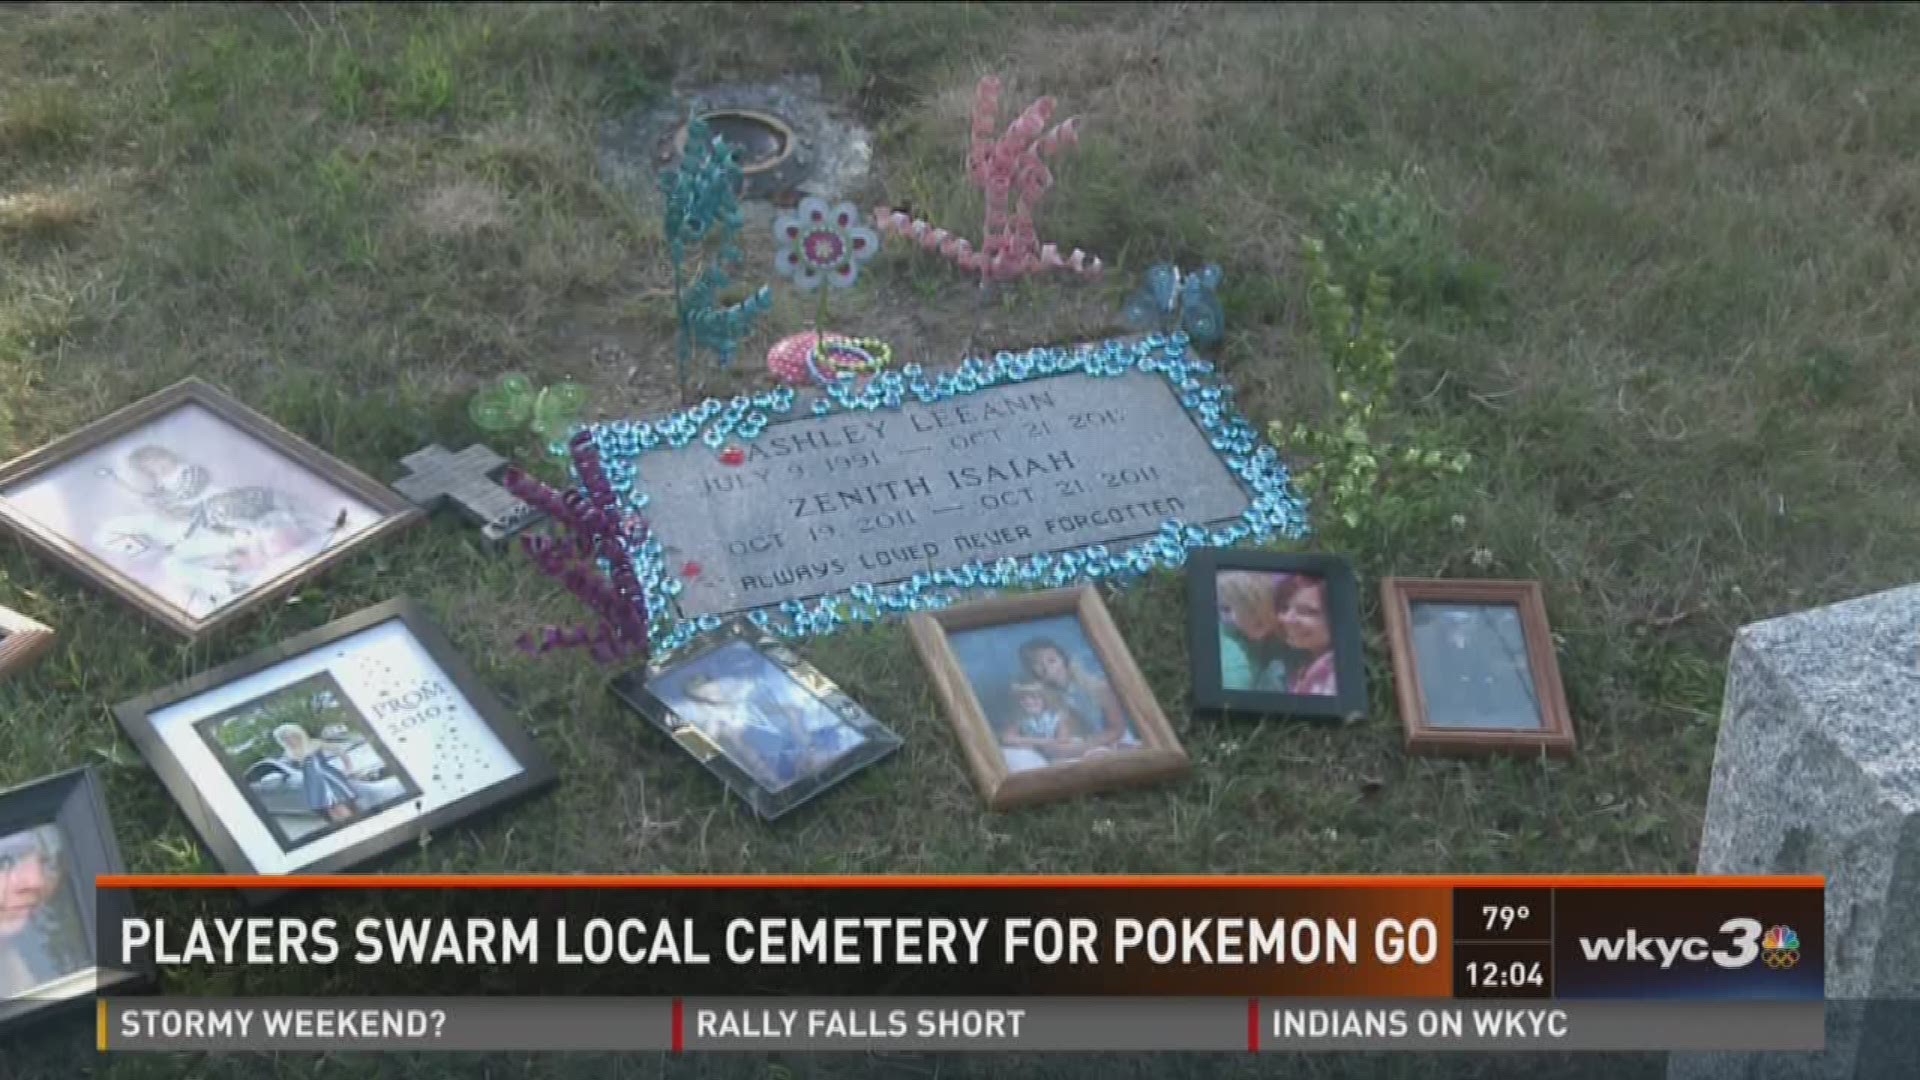 Players swarm local cemetery for Pokemon Go